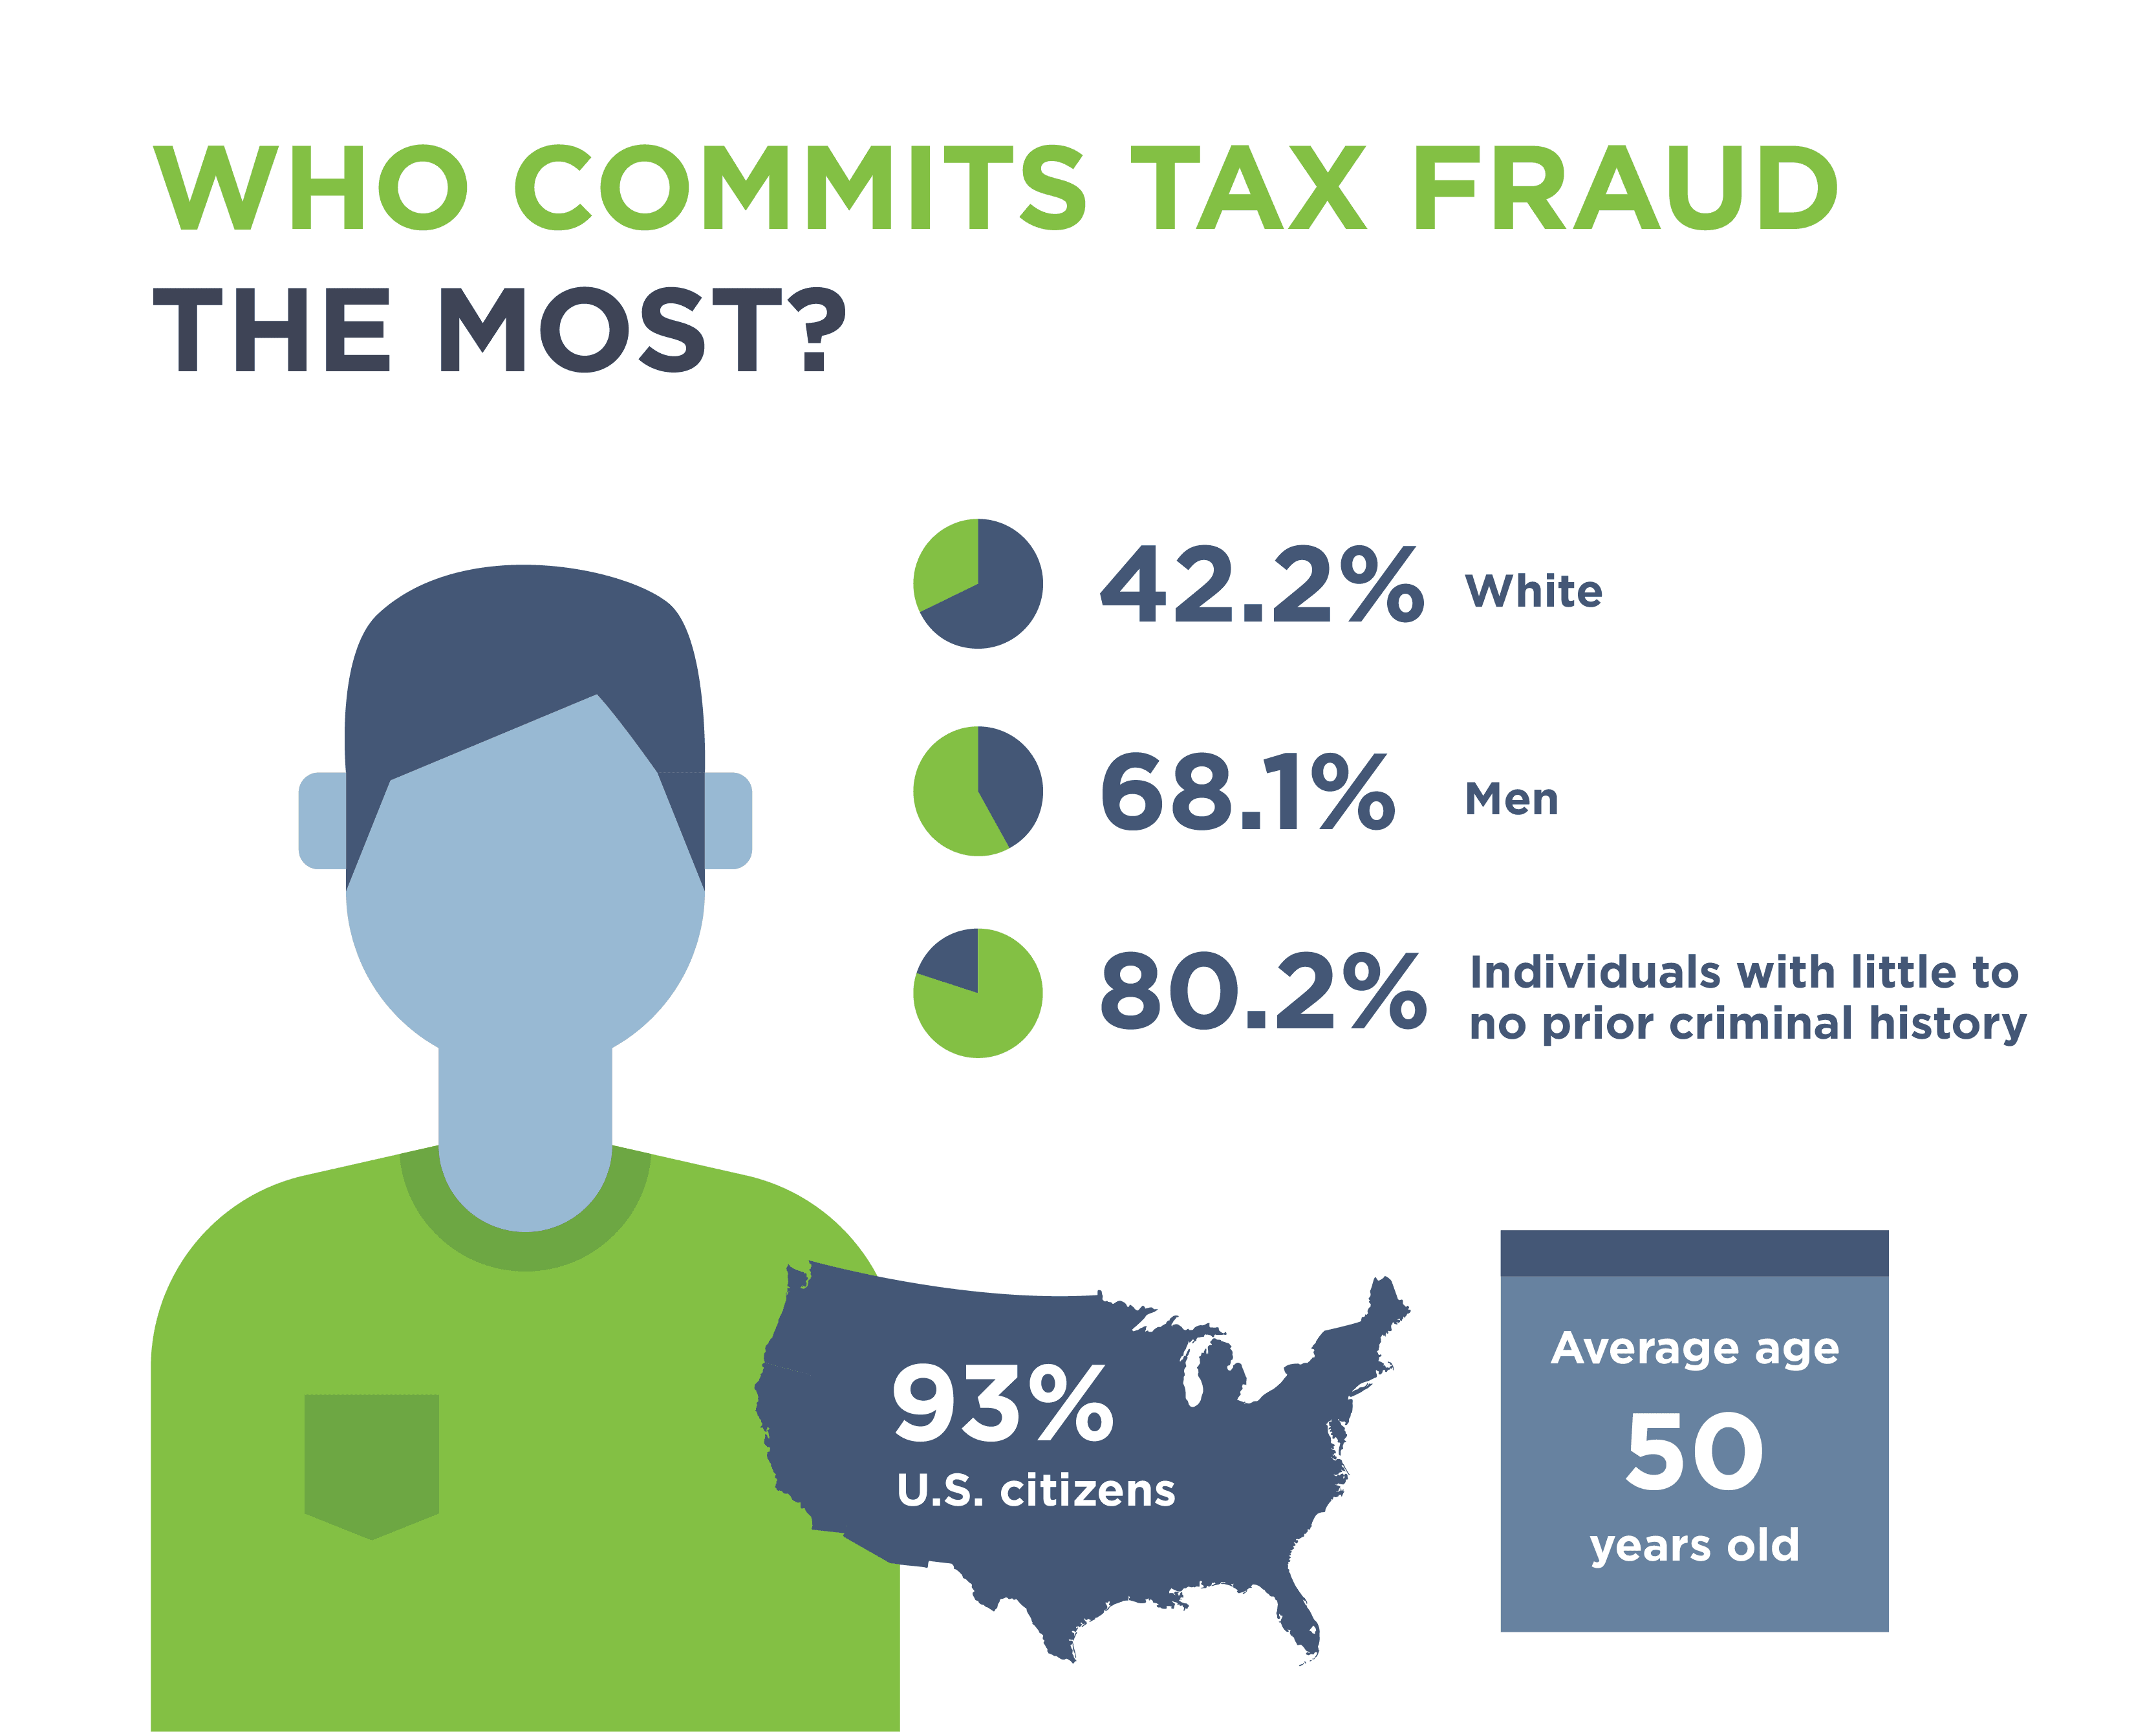 Illustration showing demographics of who commits tax fraud in the US.